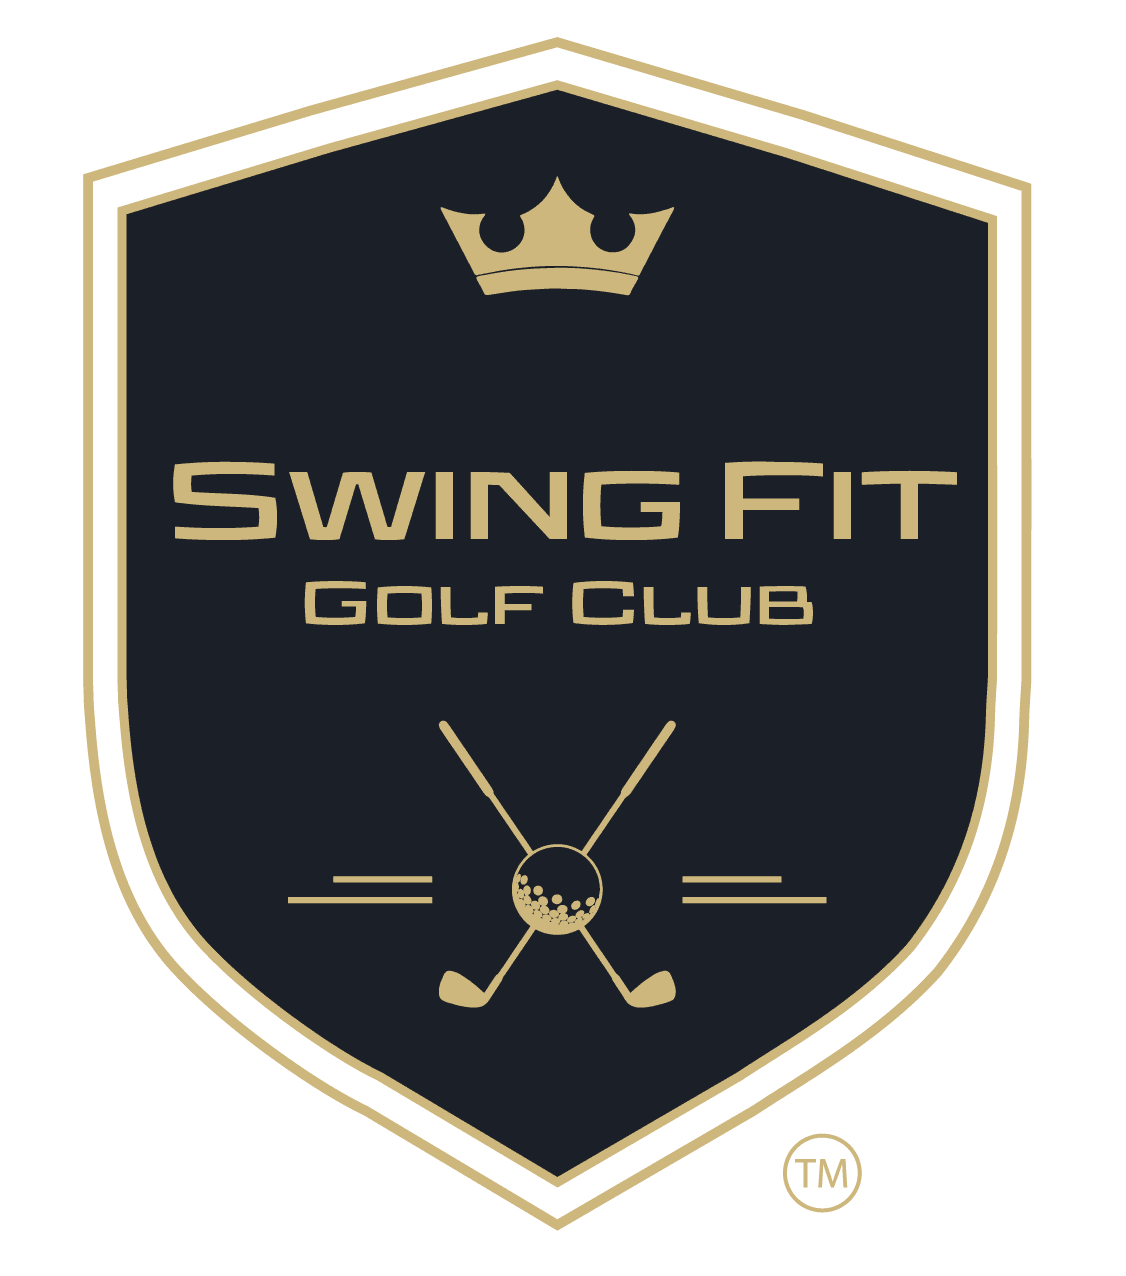 Product Services - Swing Fit Golf Club image